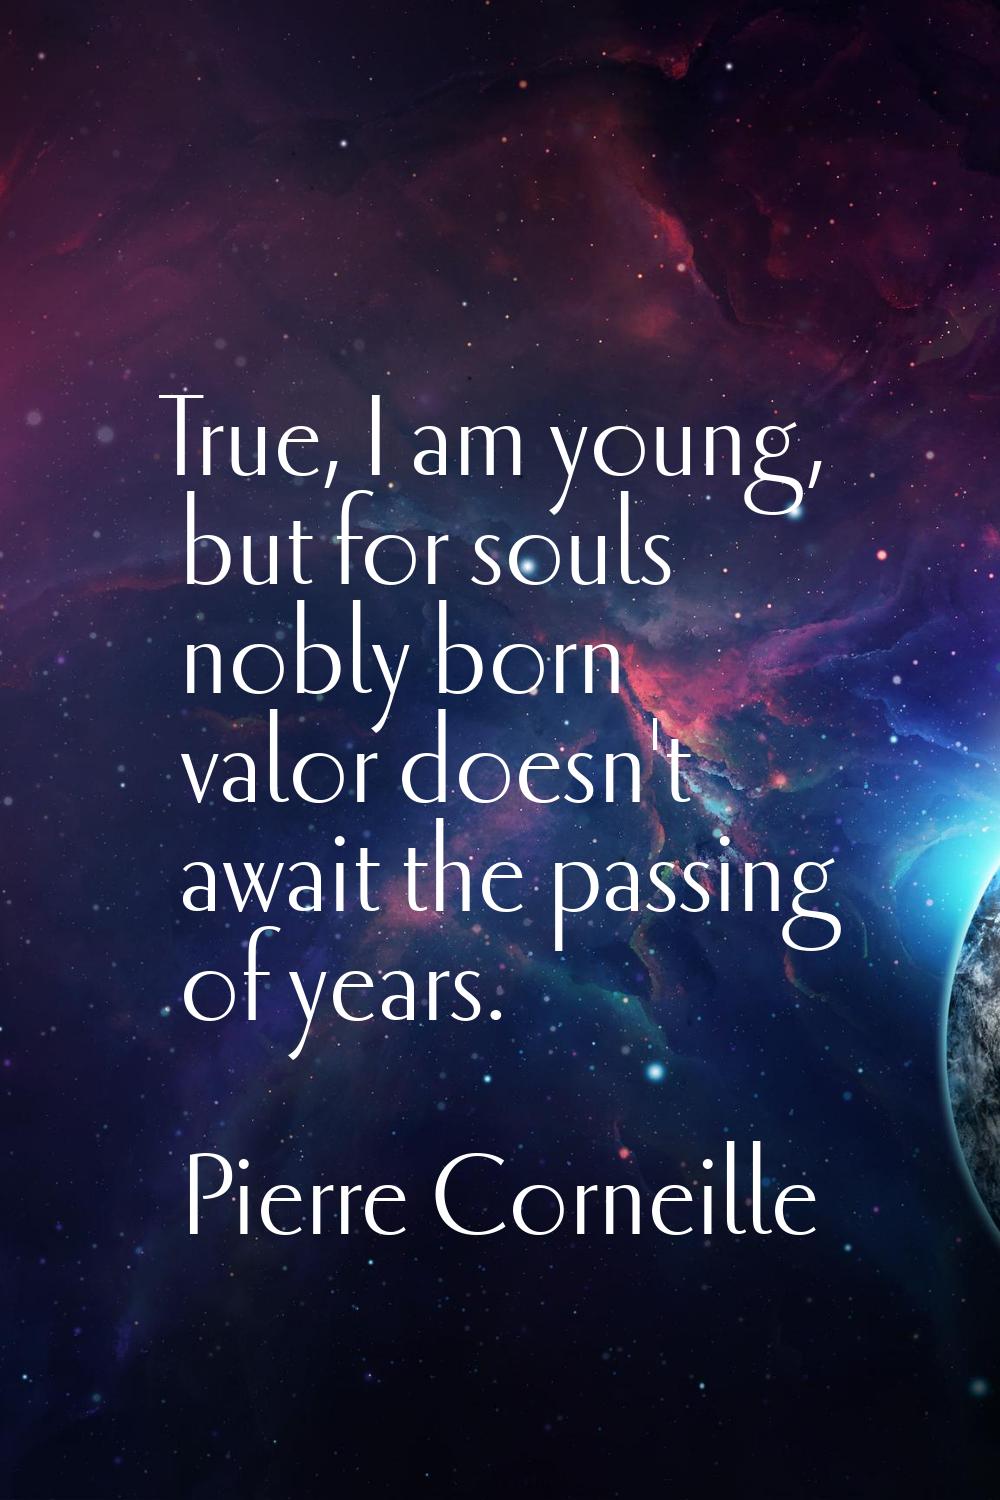 True, I am young, but for souls nobly born valor doesn't await the passing of years.